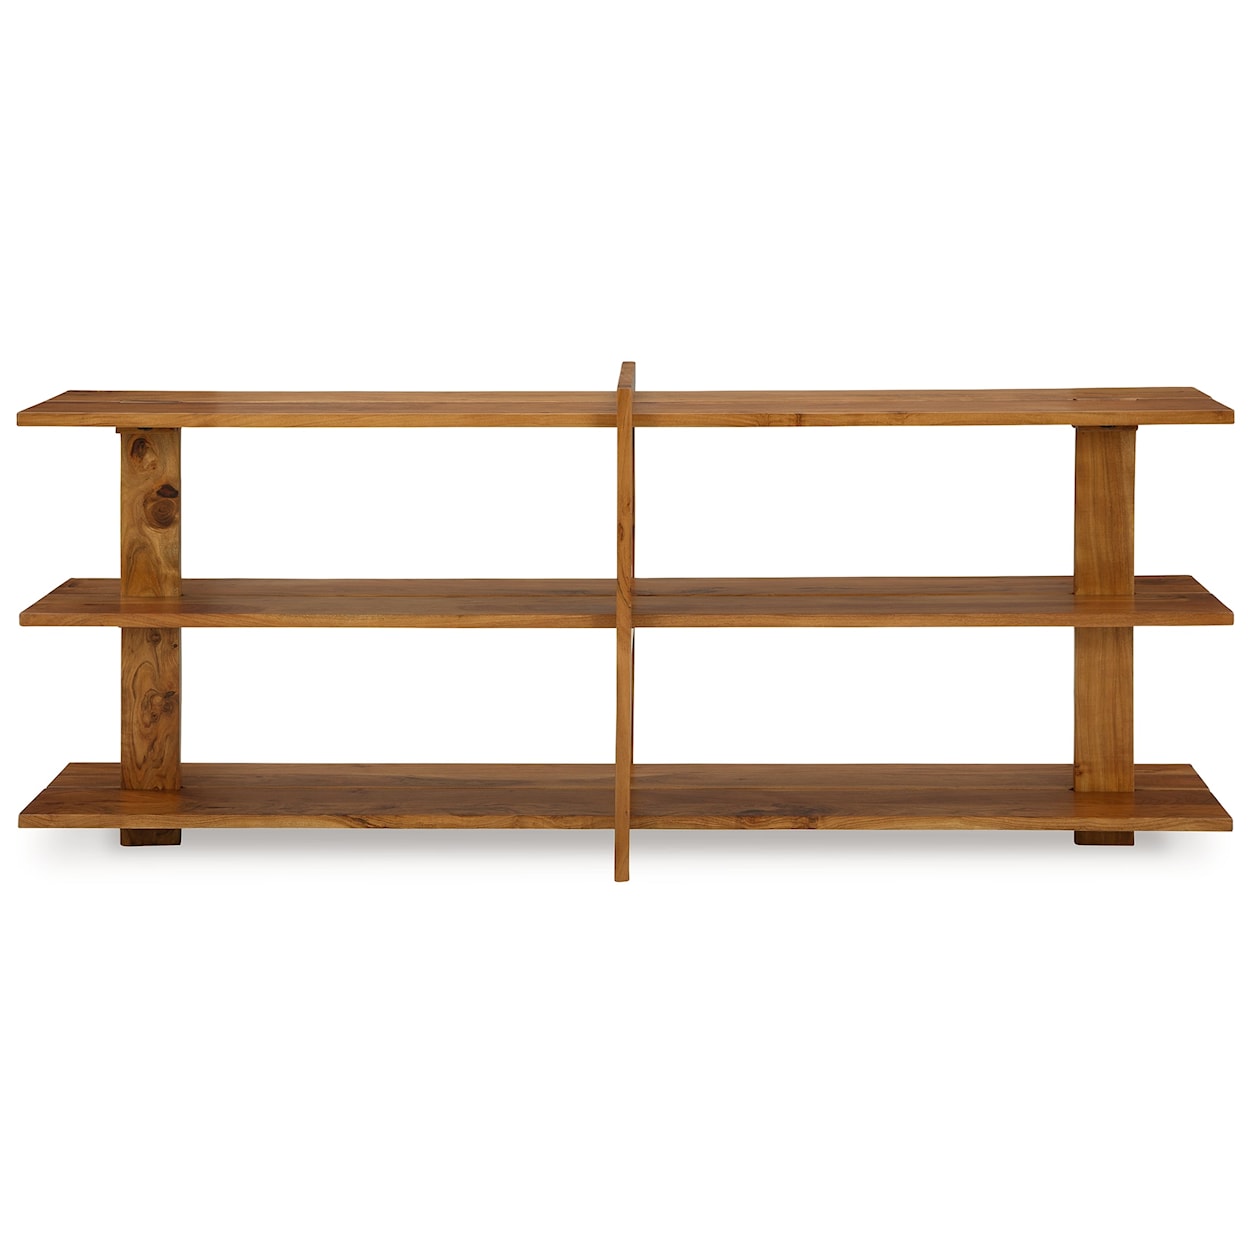 Benchcraft Fayemour Console Sofa Table